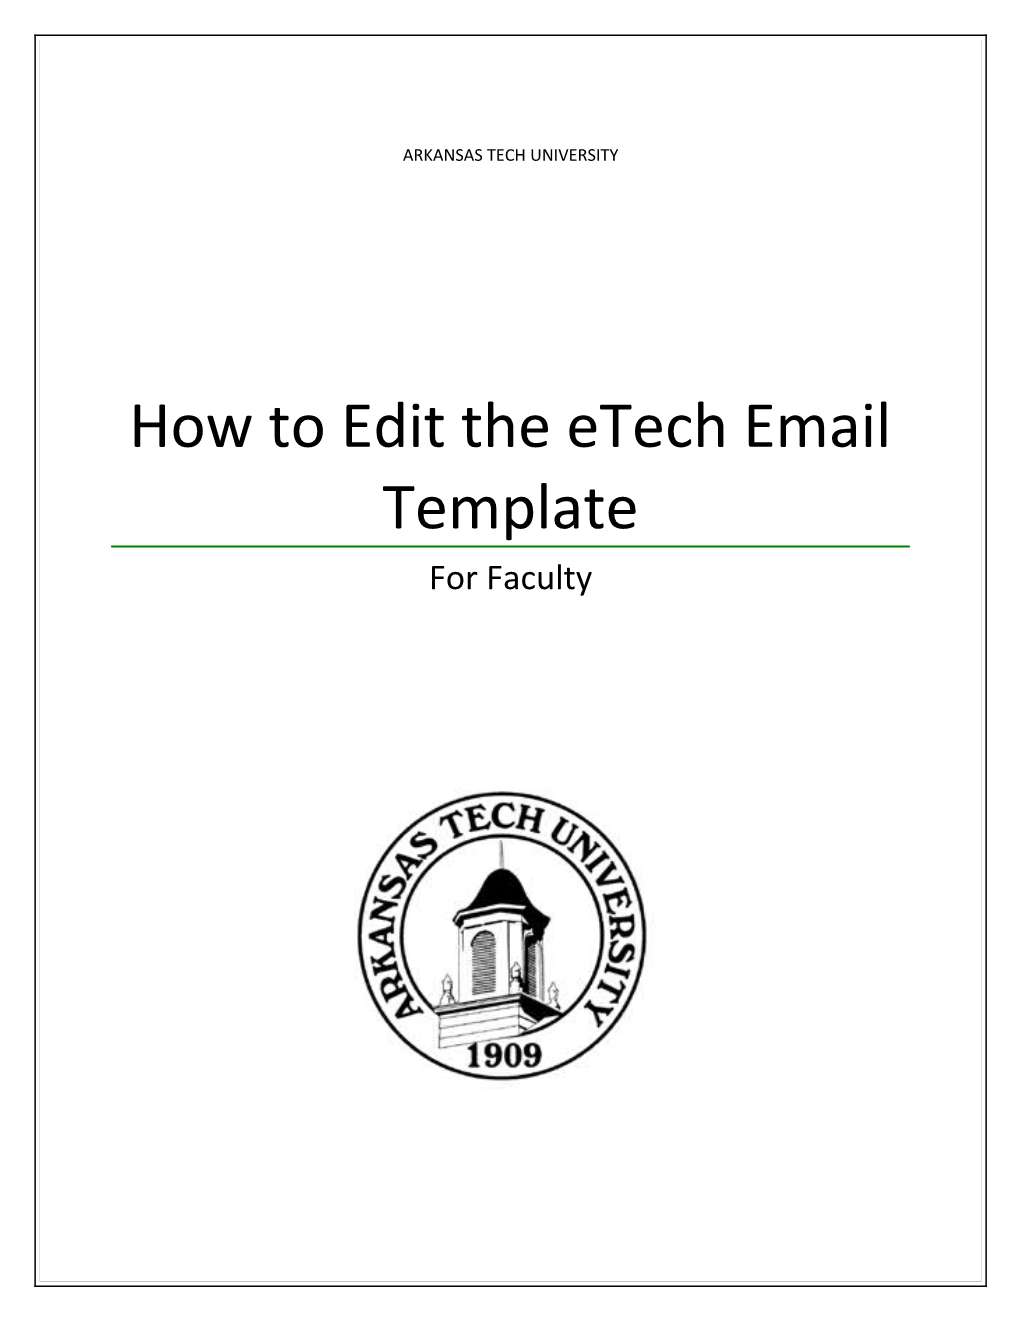 How to Edit the Etech Email Template